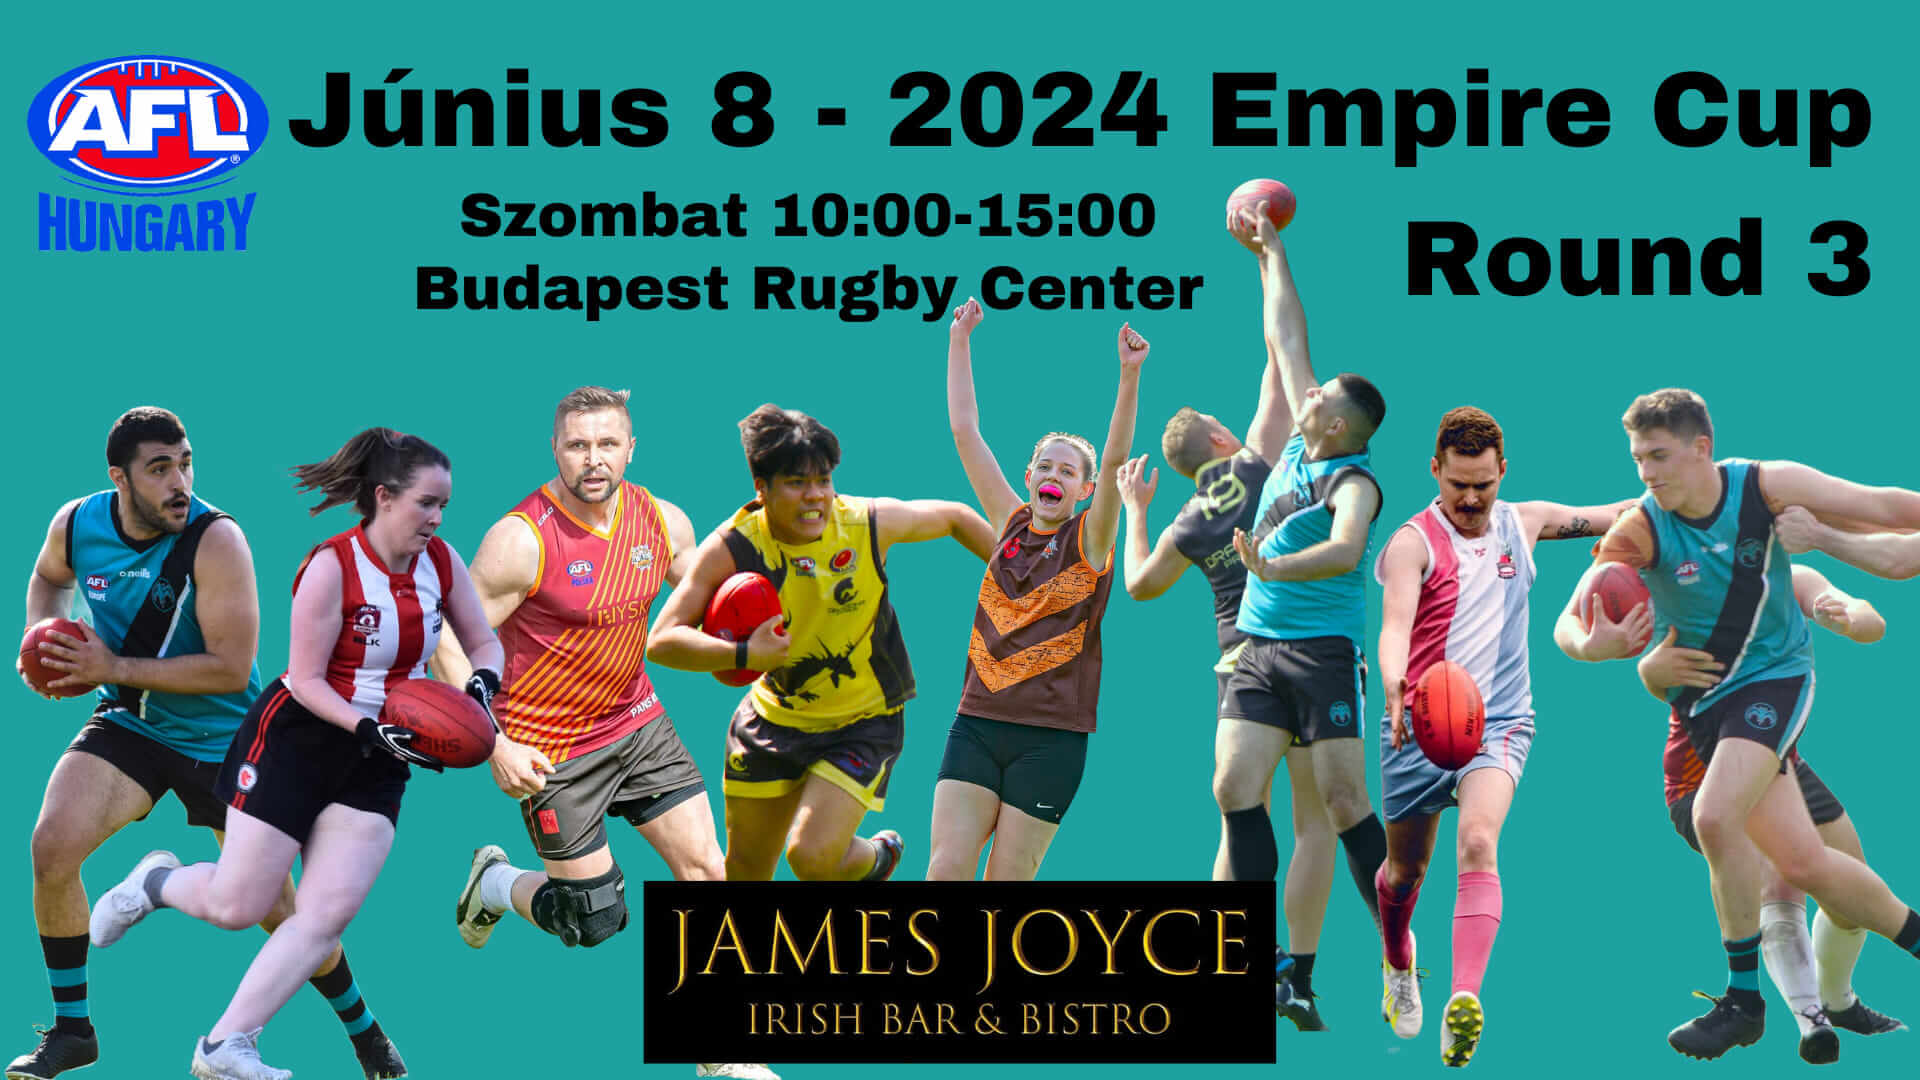 Australian Rules Football is Coming to Hungary on 8 June